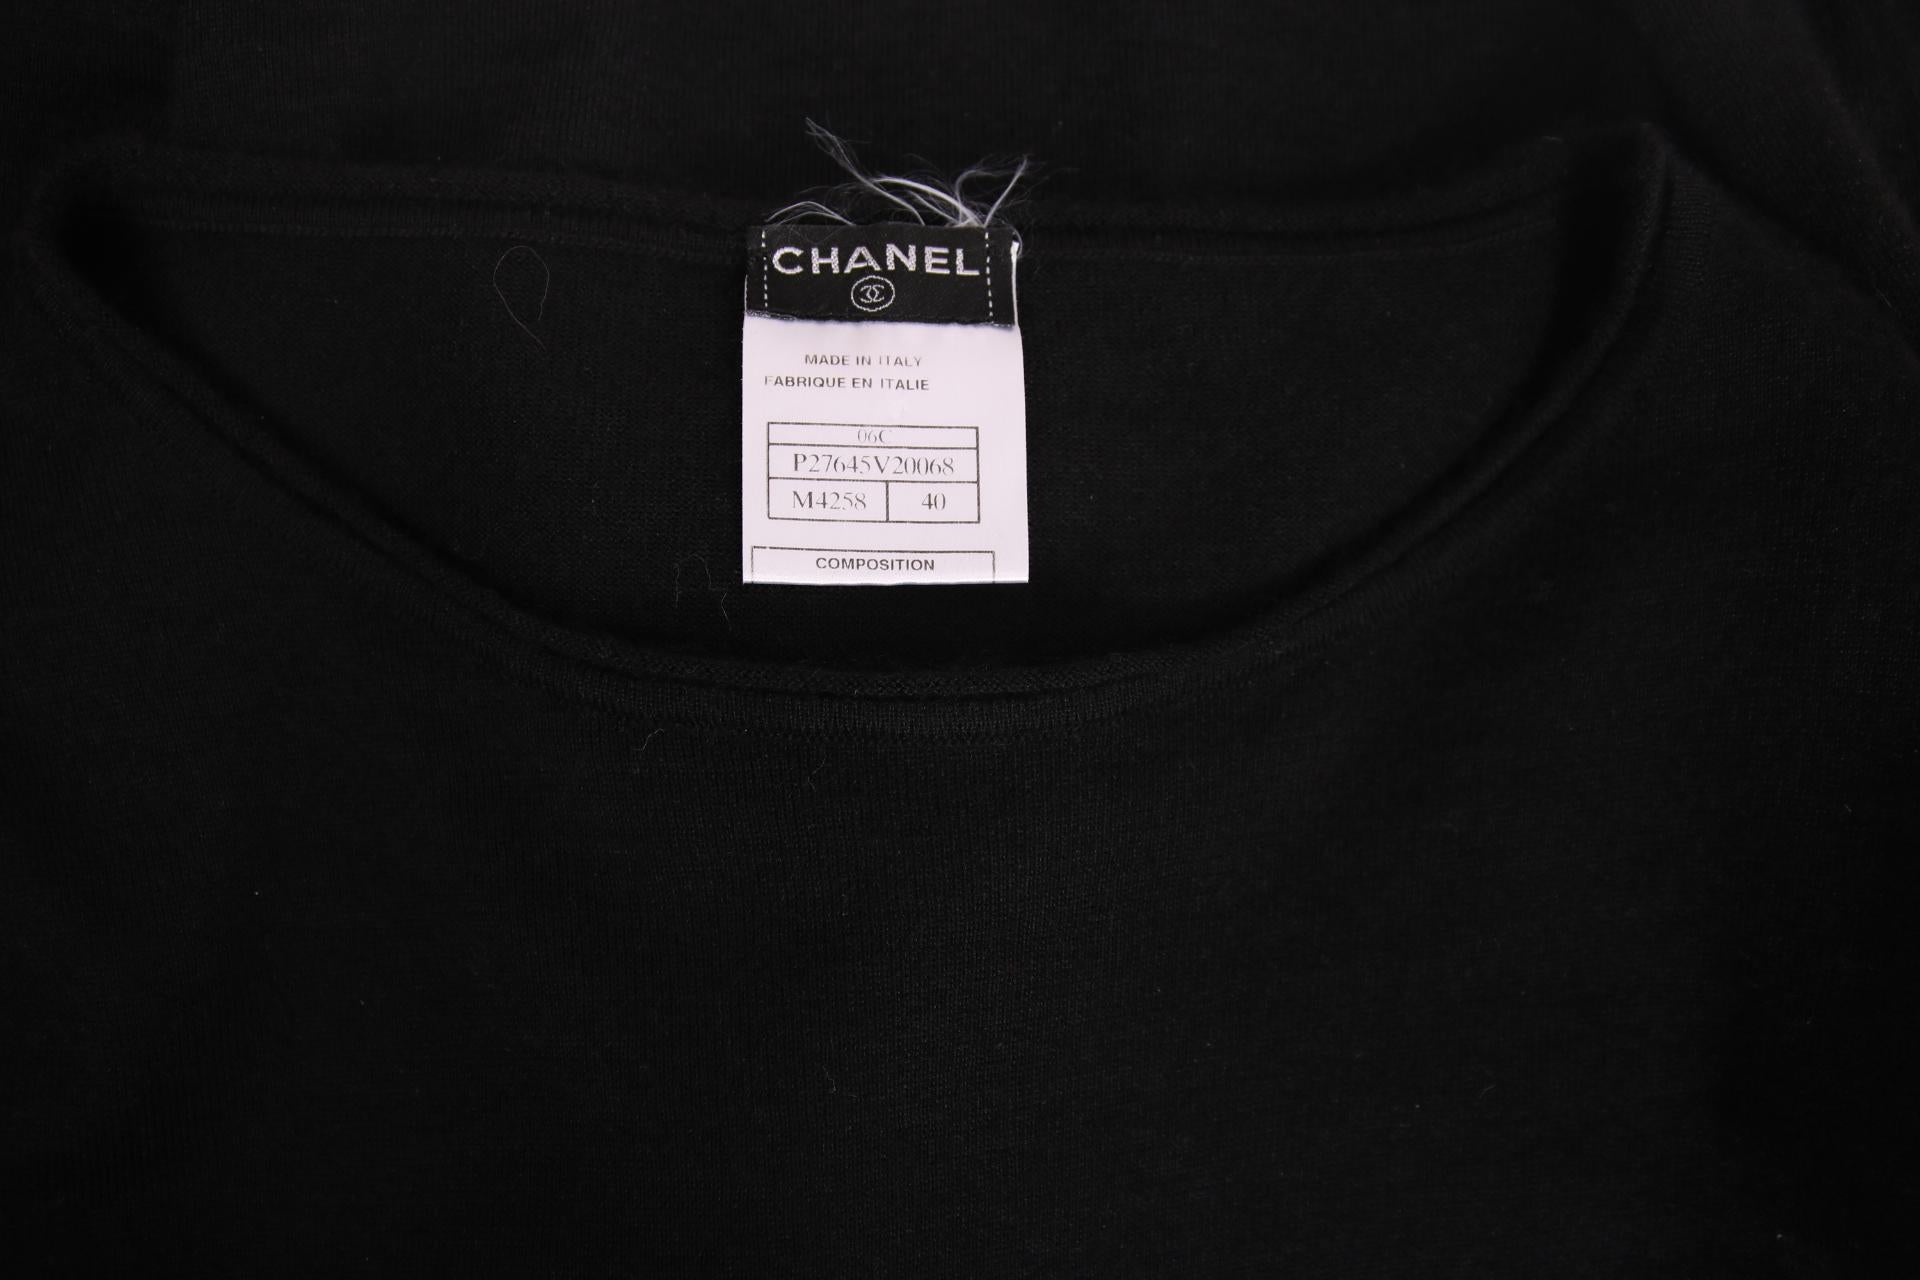 Chanel Black Cashmere Novelty Sweater w/Ribbon at Waist For Sale 2